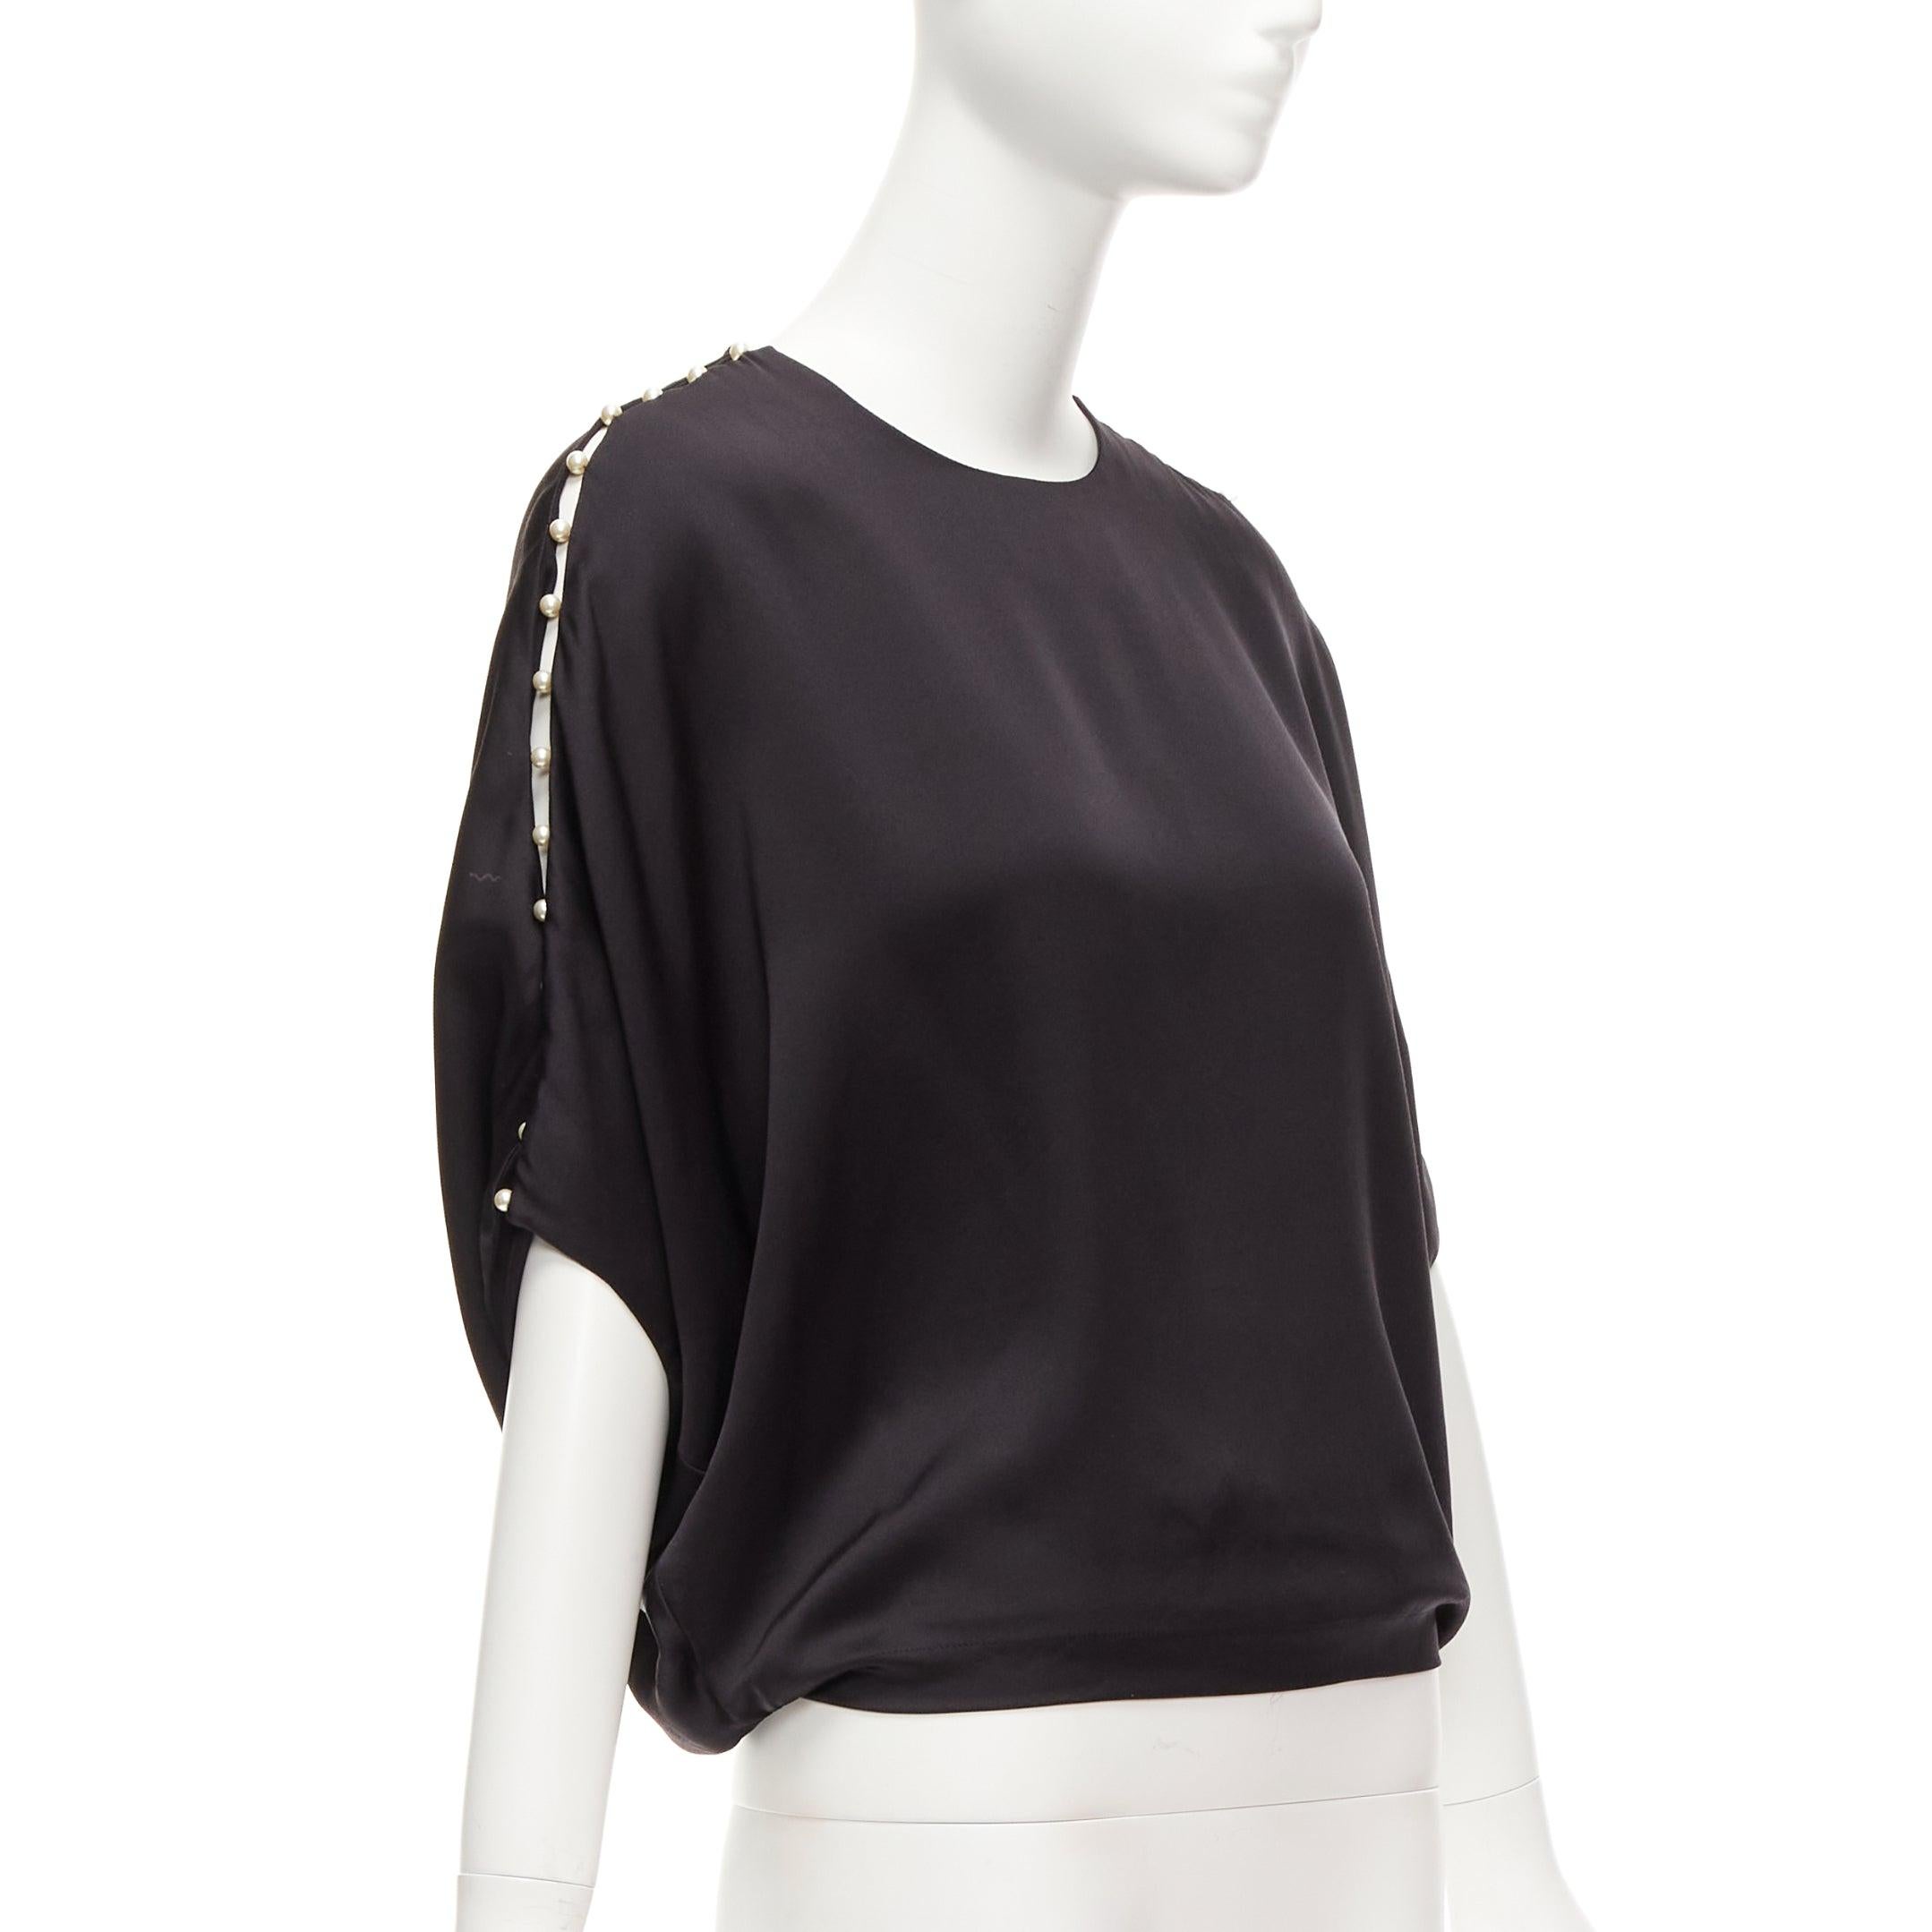 CHLOE 100% silk black pearl embellished lattice dolman top FR34 XS
Reference: YIKK/A00092
Brand: Chloe
Material: Silk, Polyester
Color: Black, Pearl
Pattern: Solid
Closure: Zip
Lining: Black Fabric
Extra Details: Back zip.
Made in: